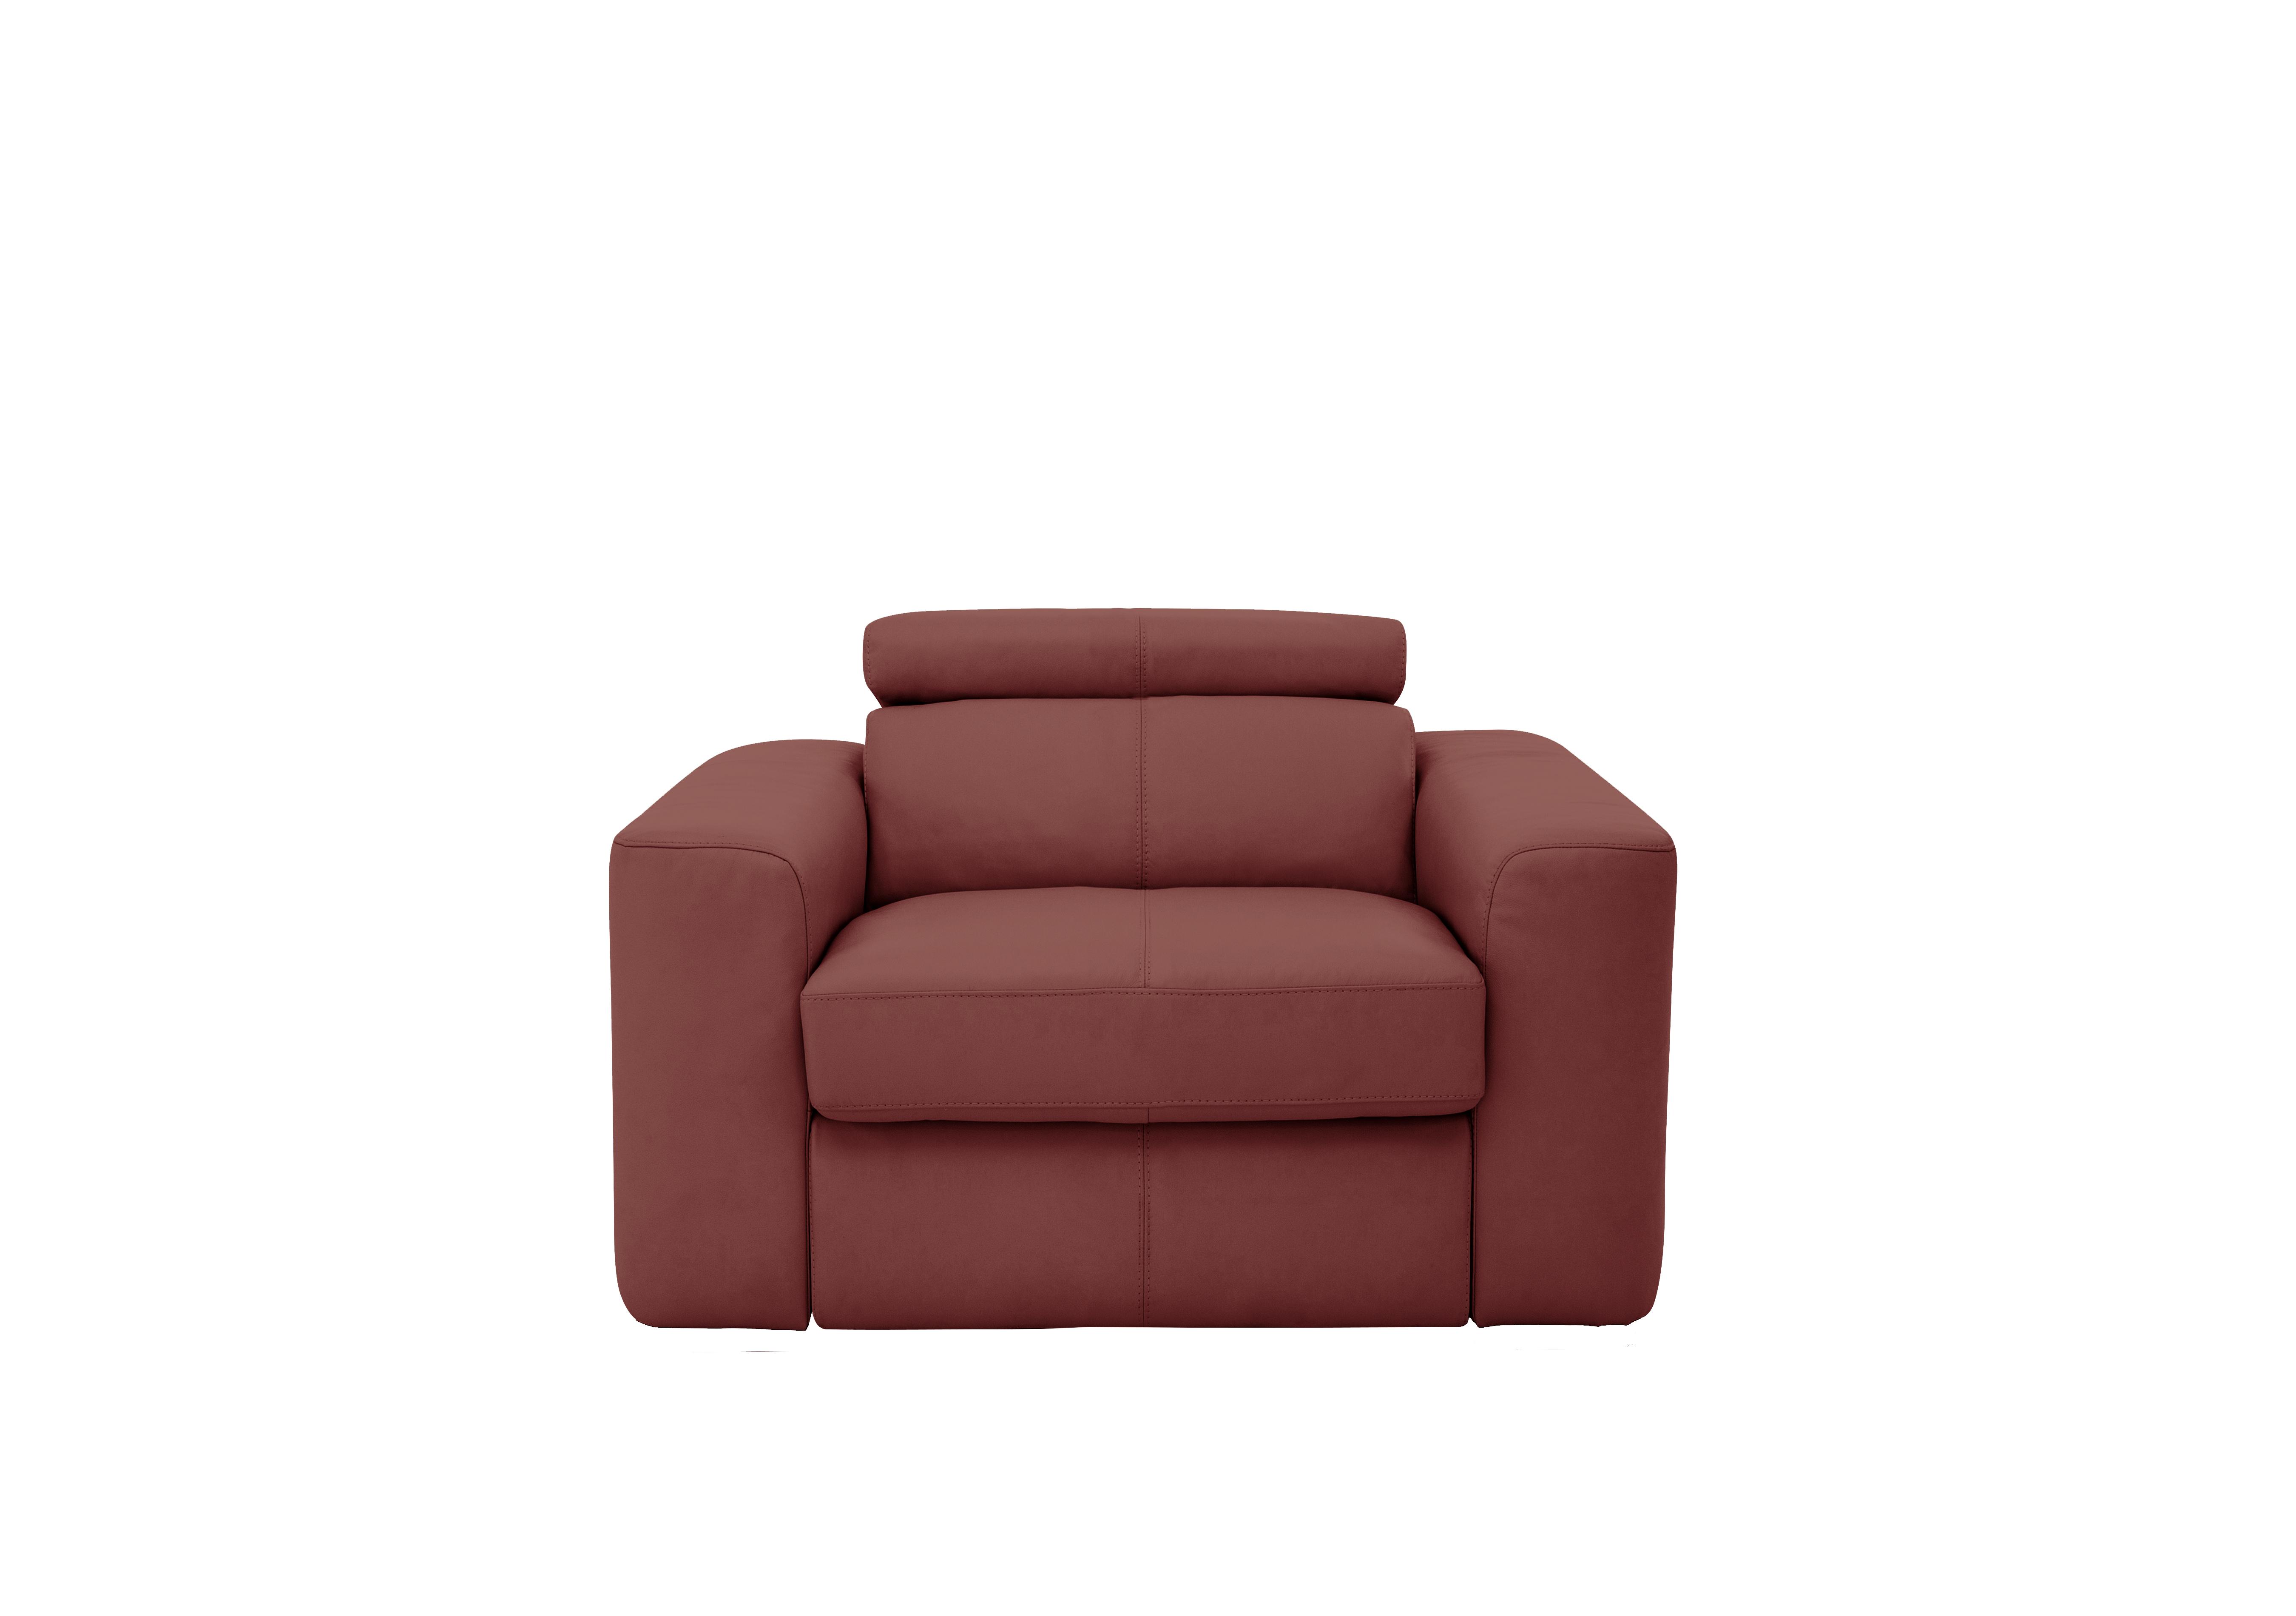 Infinity Leather Armchair in Bv-035c Deep Red on Furniture Village